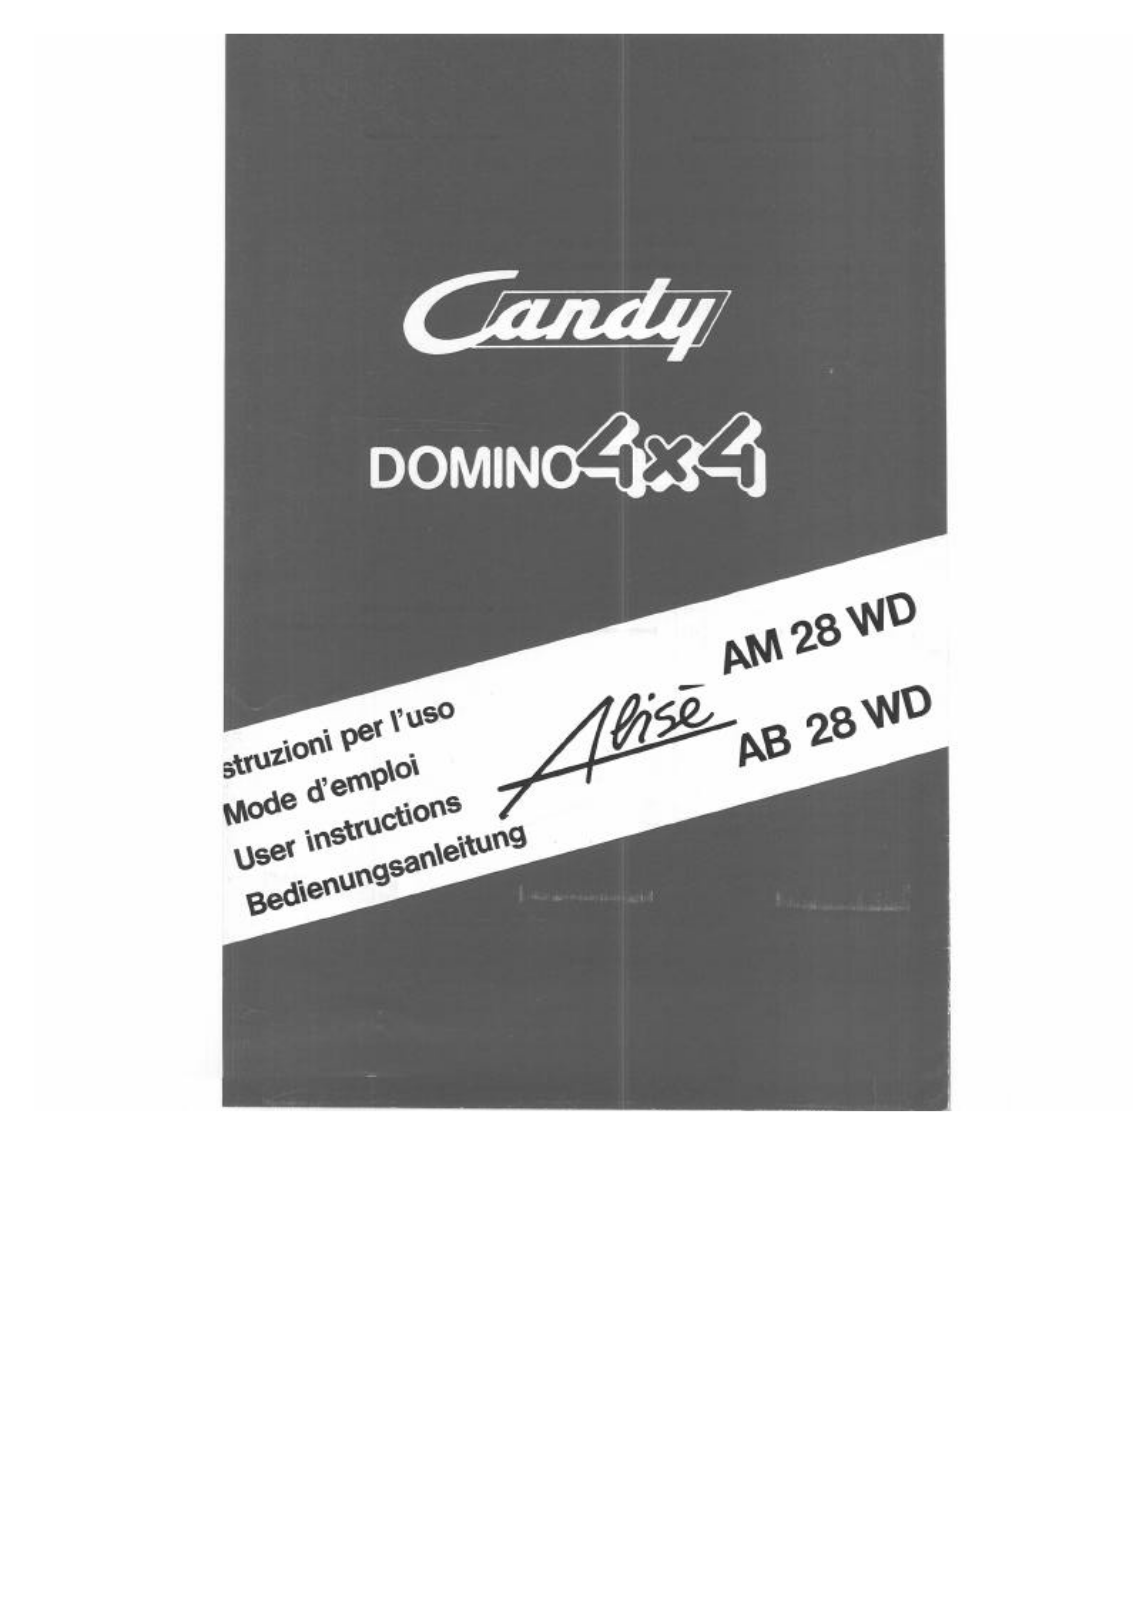 CANDY ALISE AB 28 WD, ALISE AM 28 WD User Manual